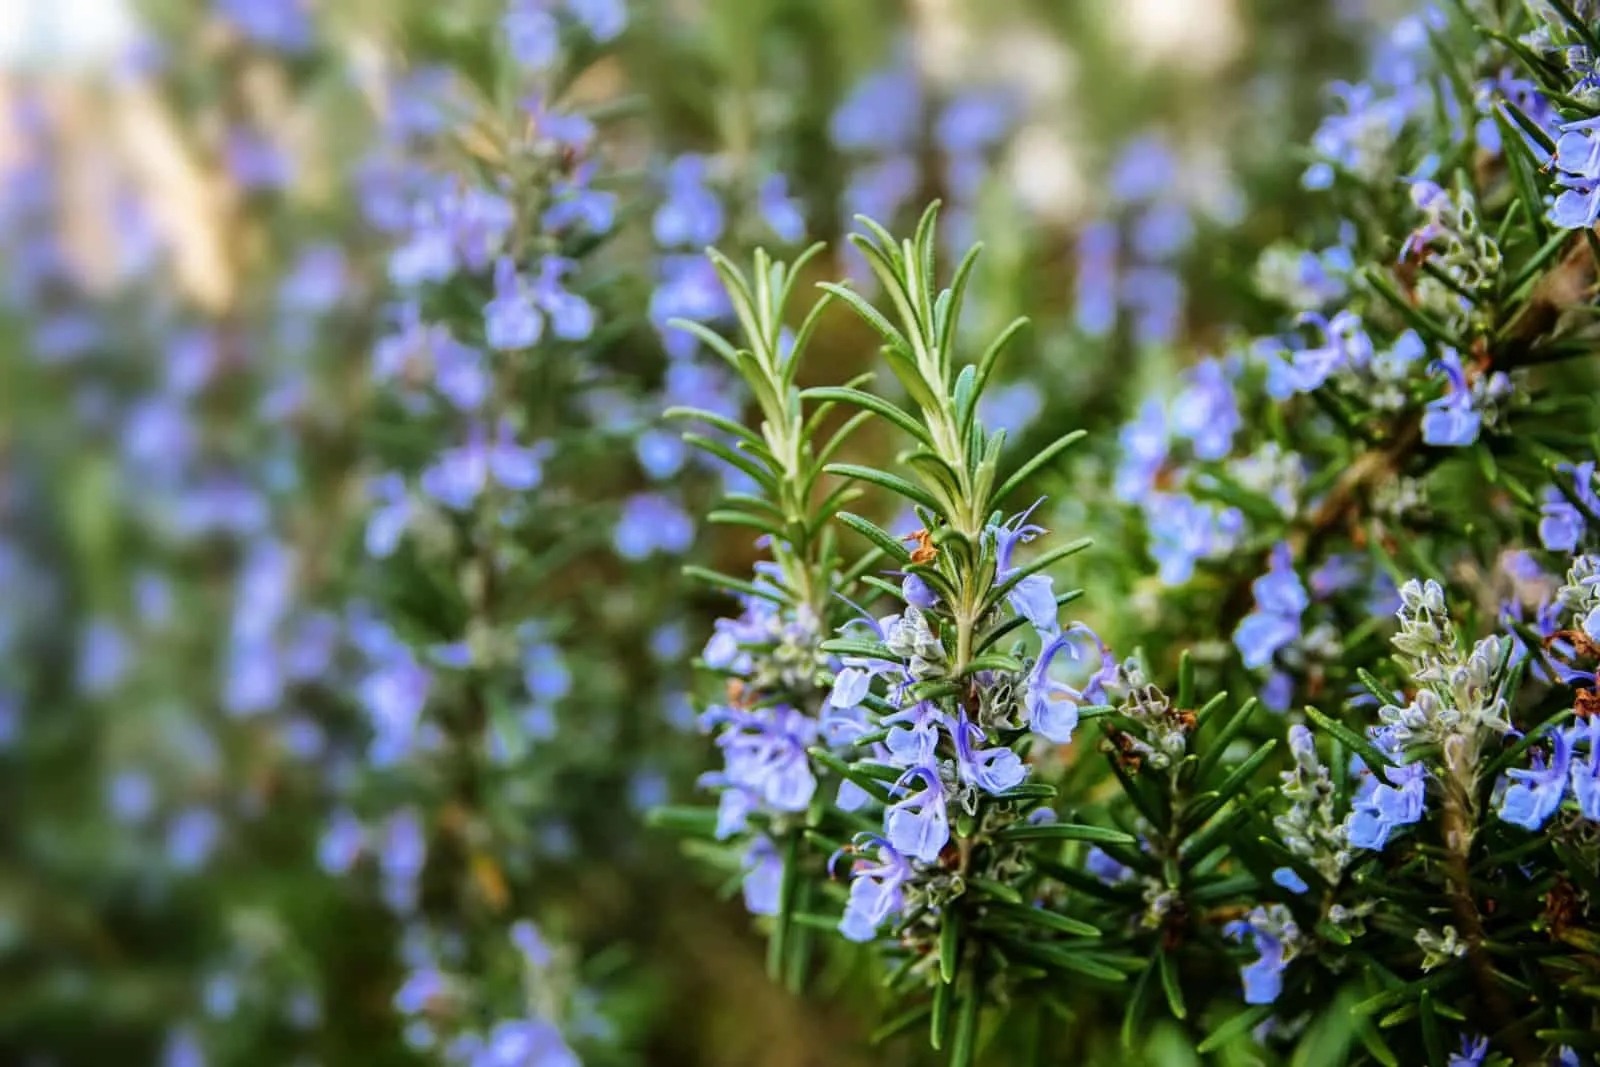 blossoming rosemary plants in the herb garden